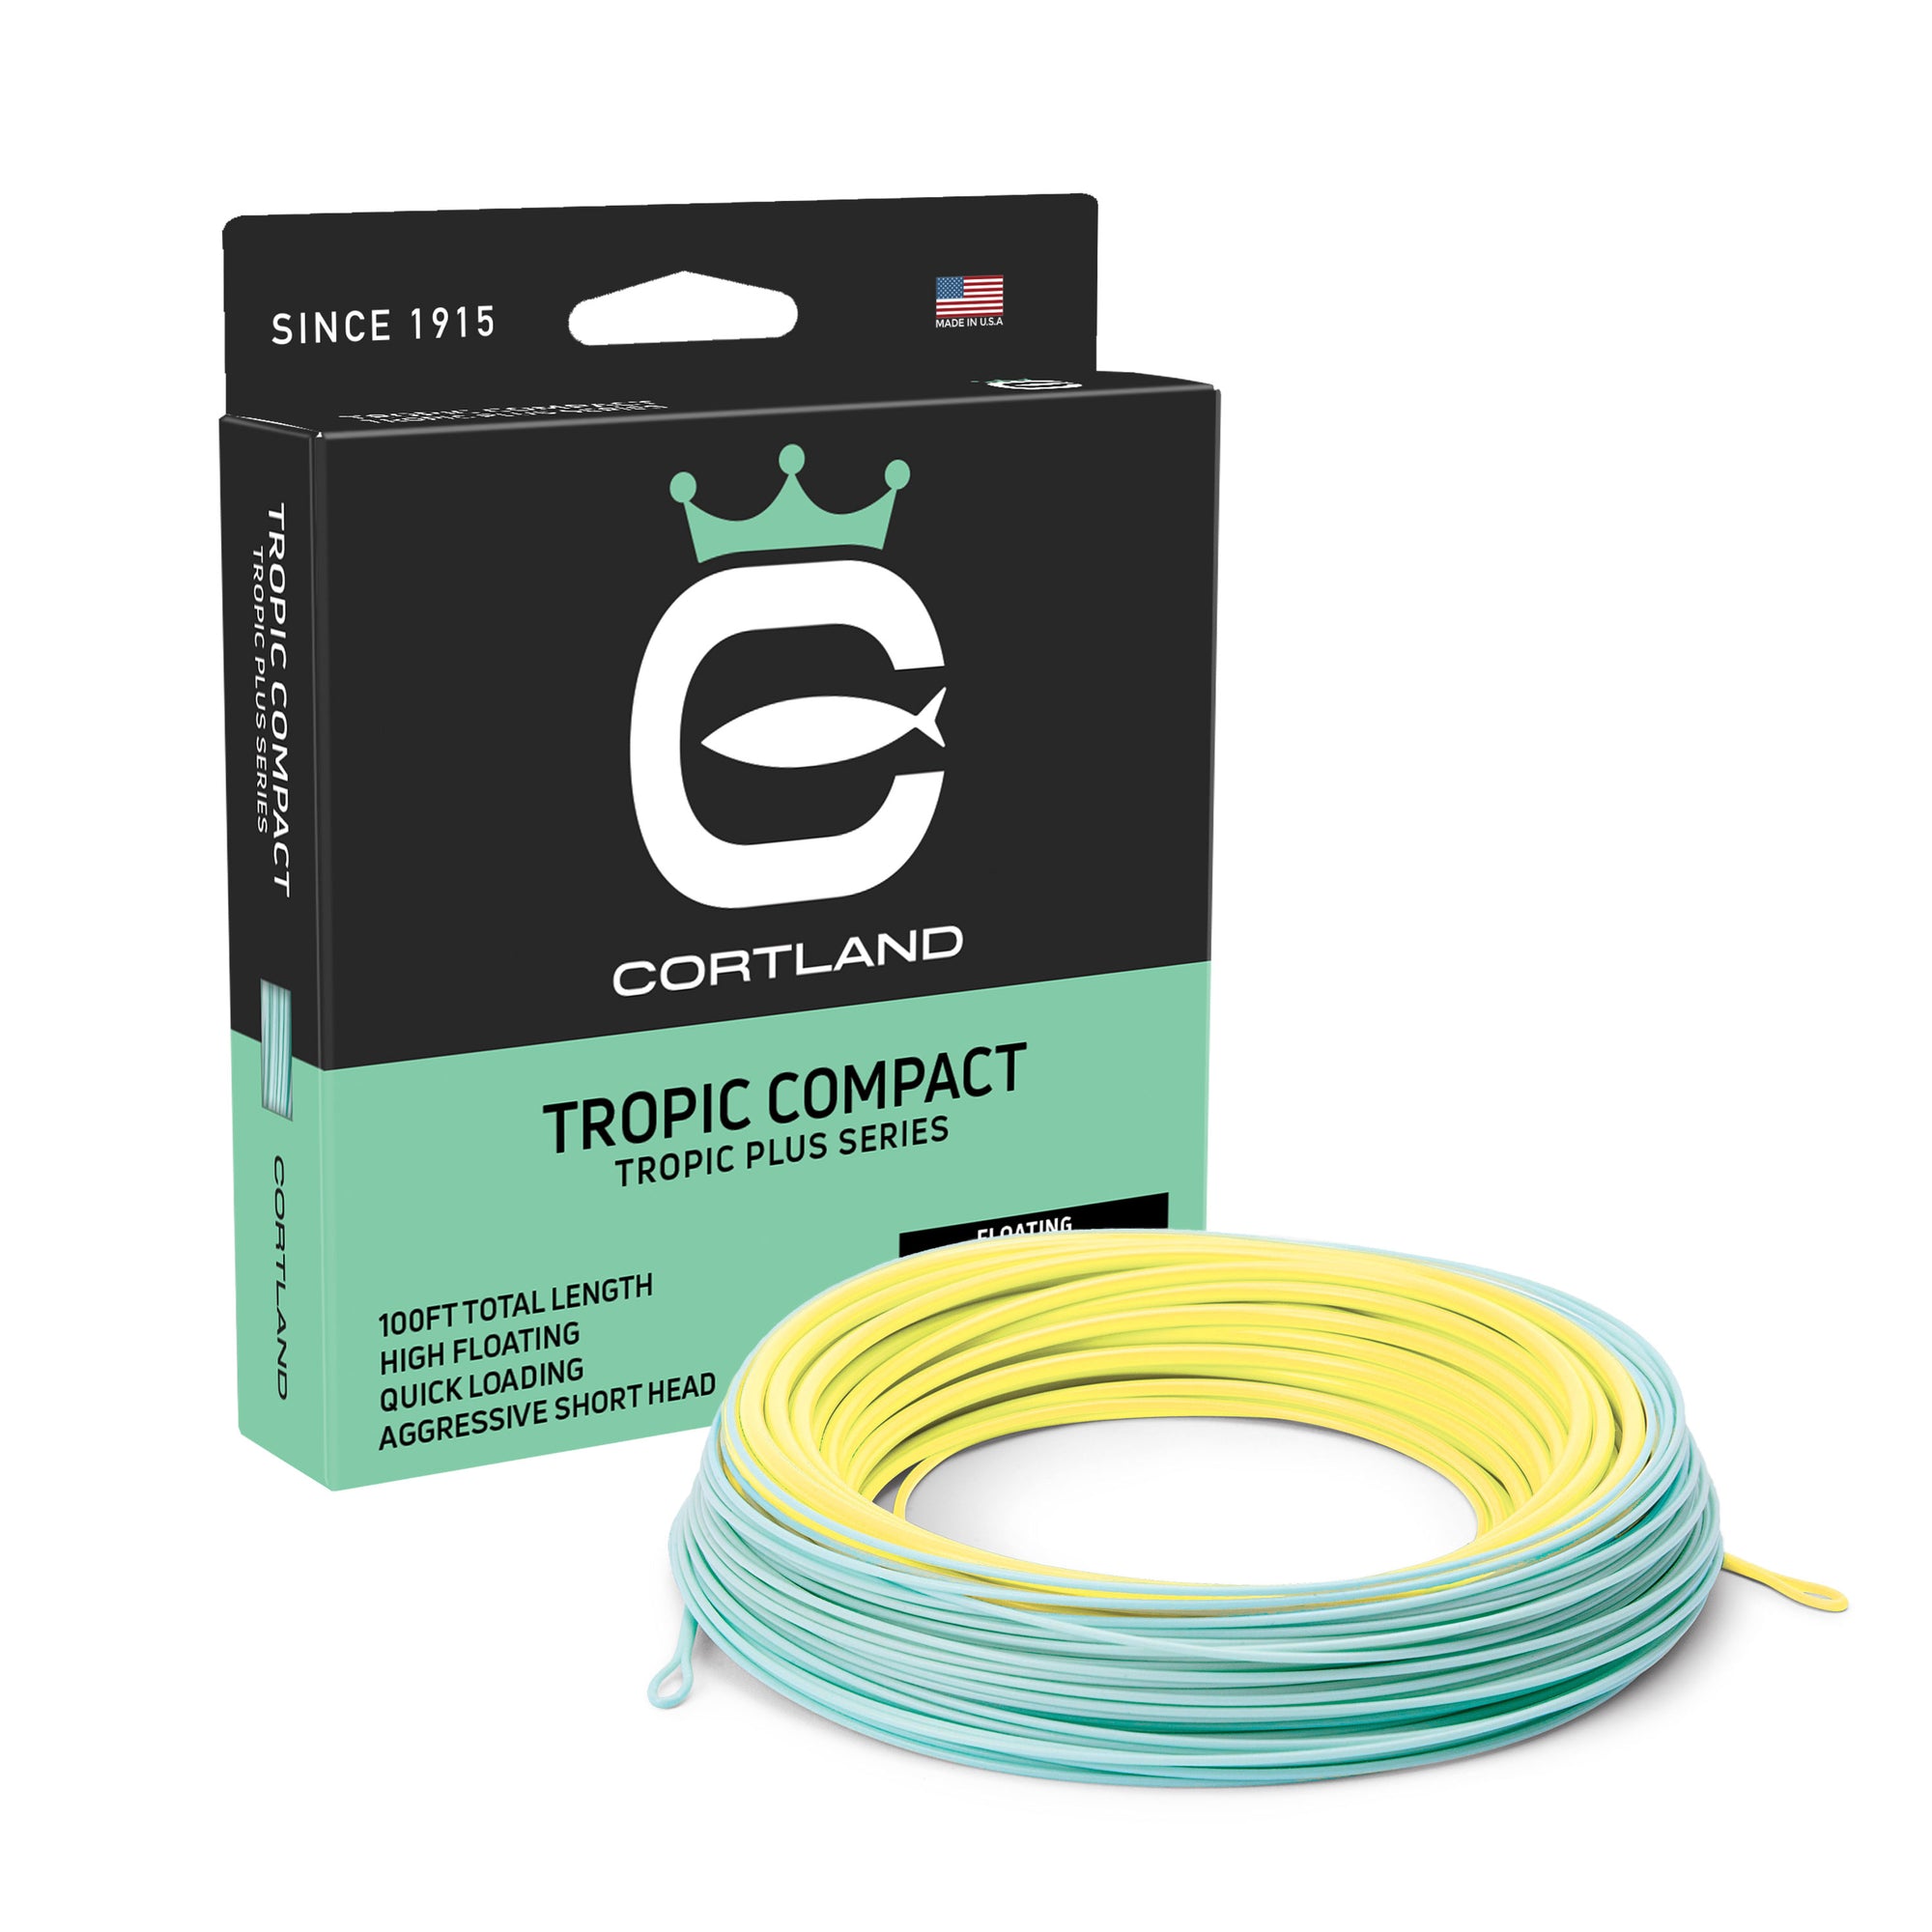 Tropic Compact Fly Line and Box. The line is aqua blue and pale yellow. The box is black at the top and light blue at the bottom. 